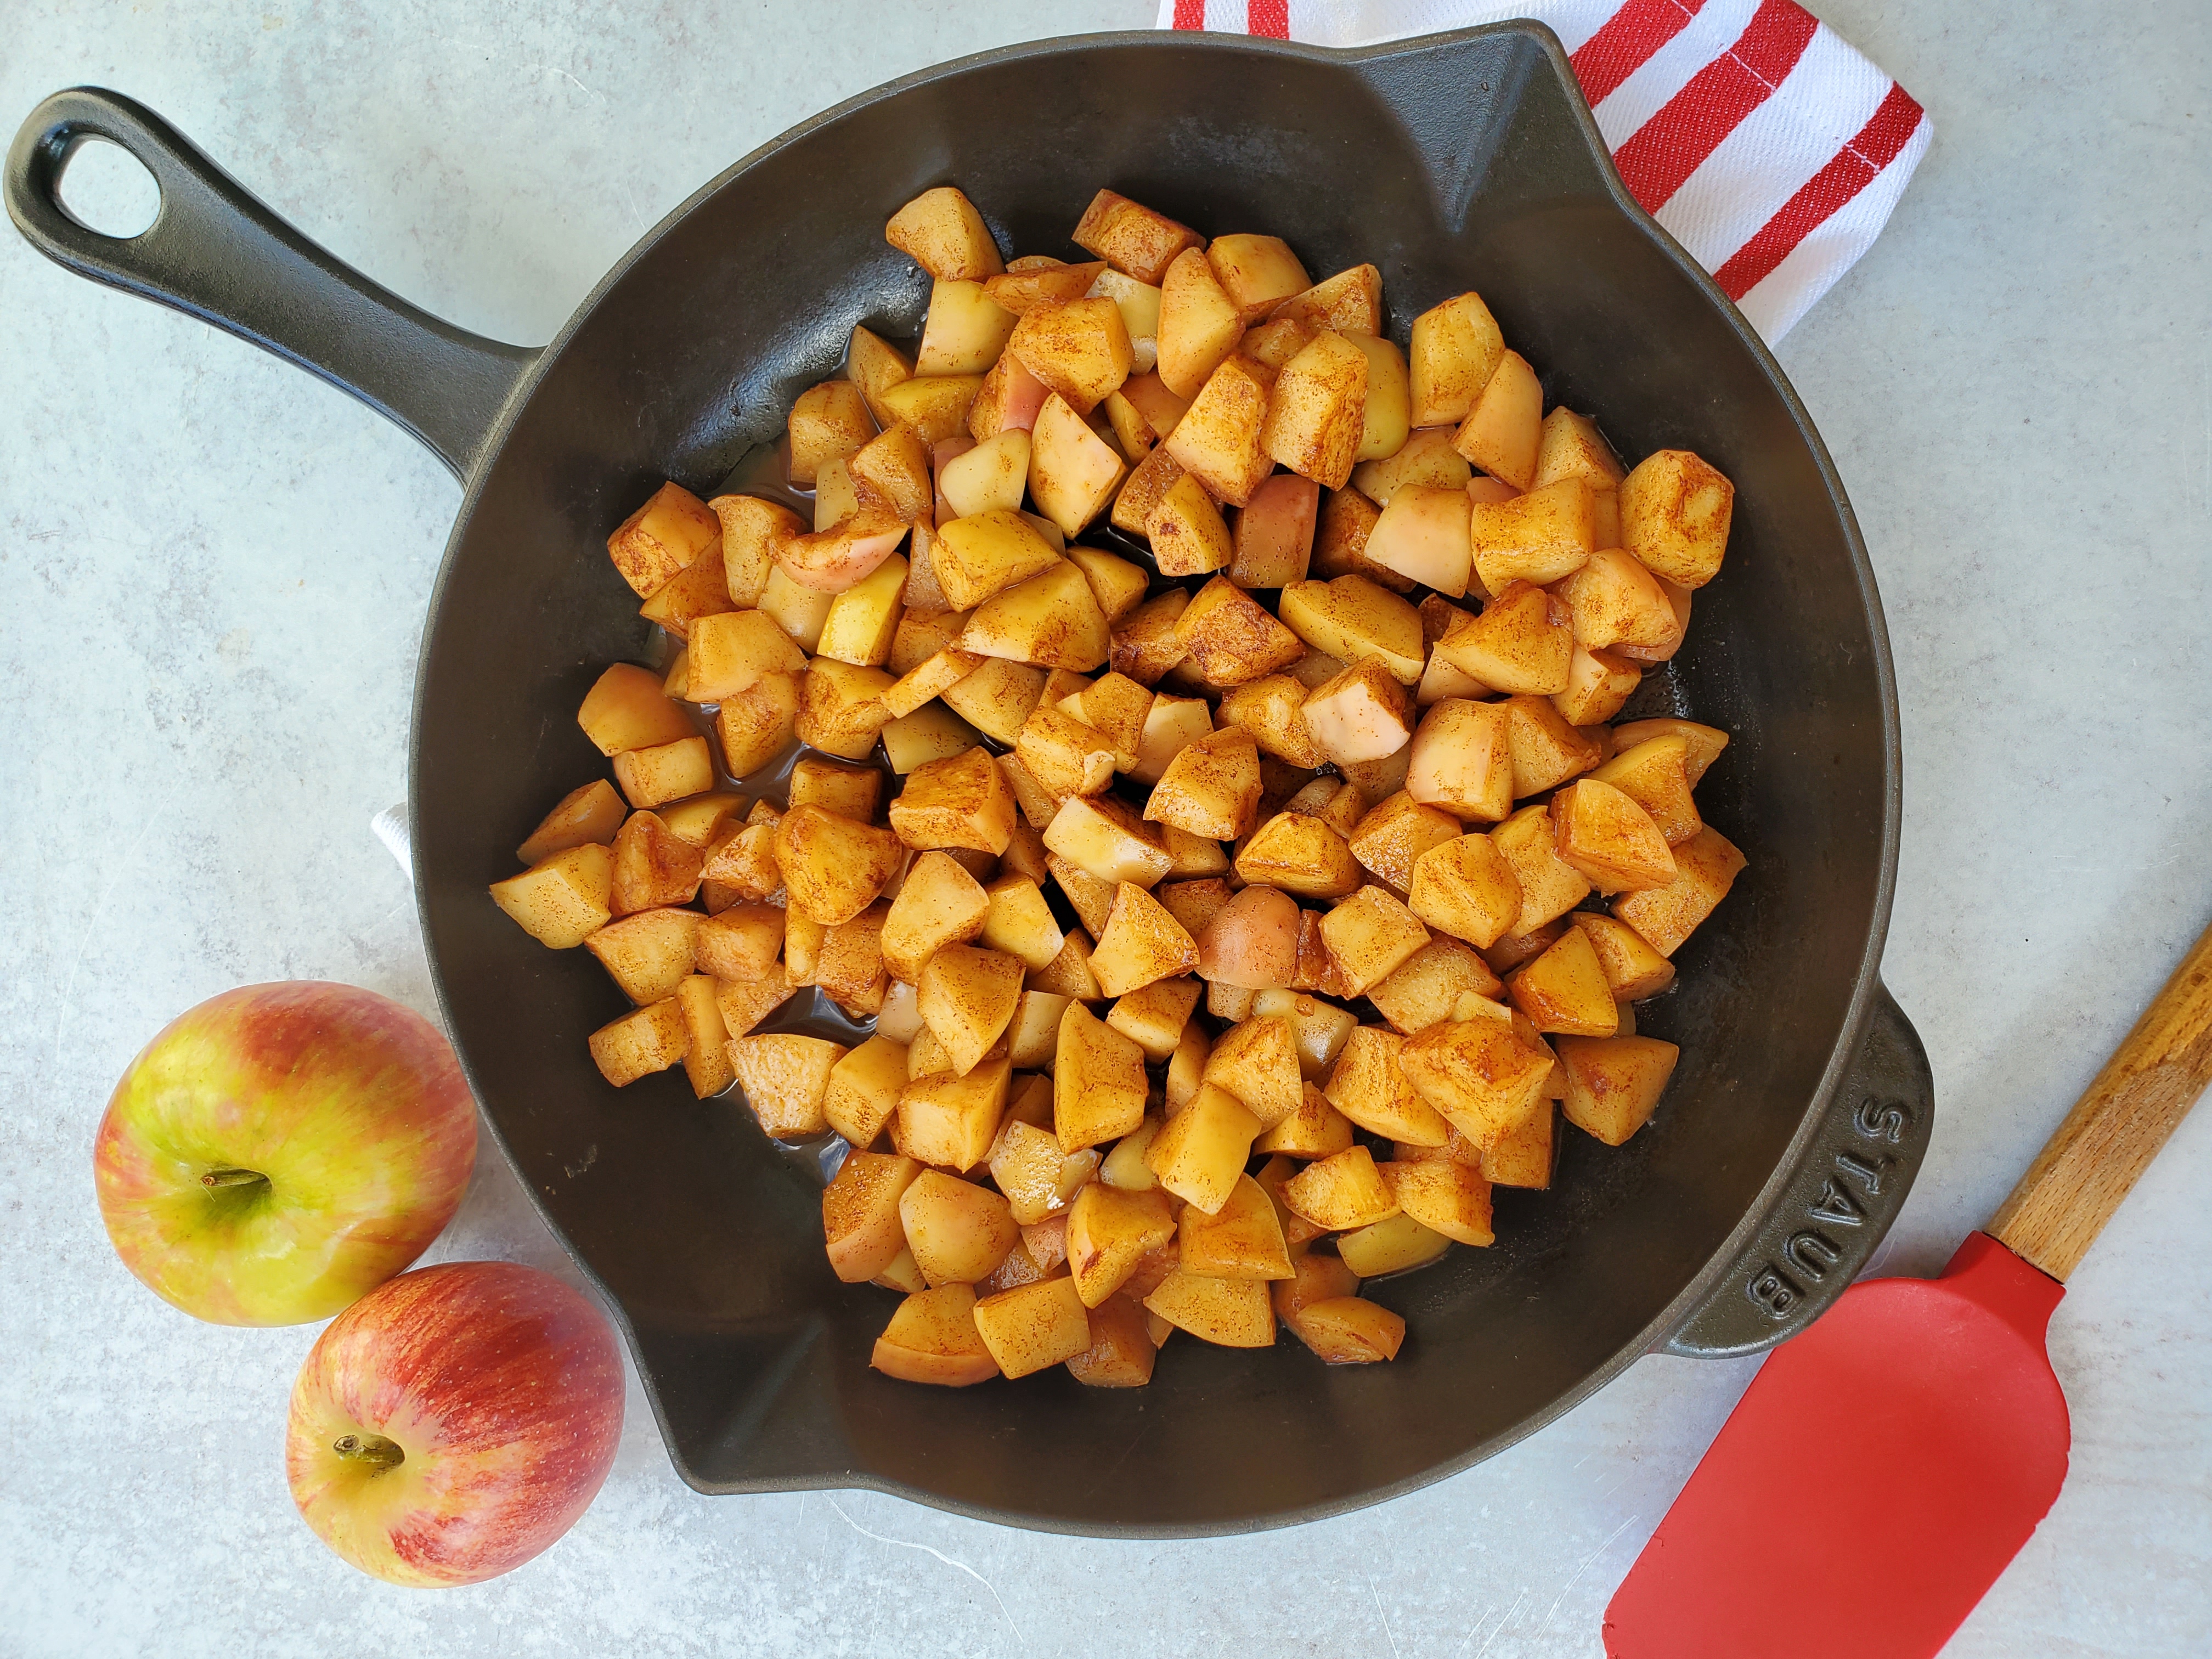 Cinnamon Skillet Apples with towel and apples